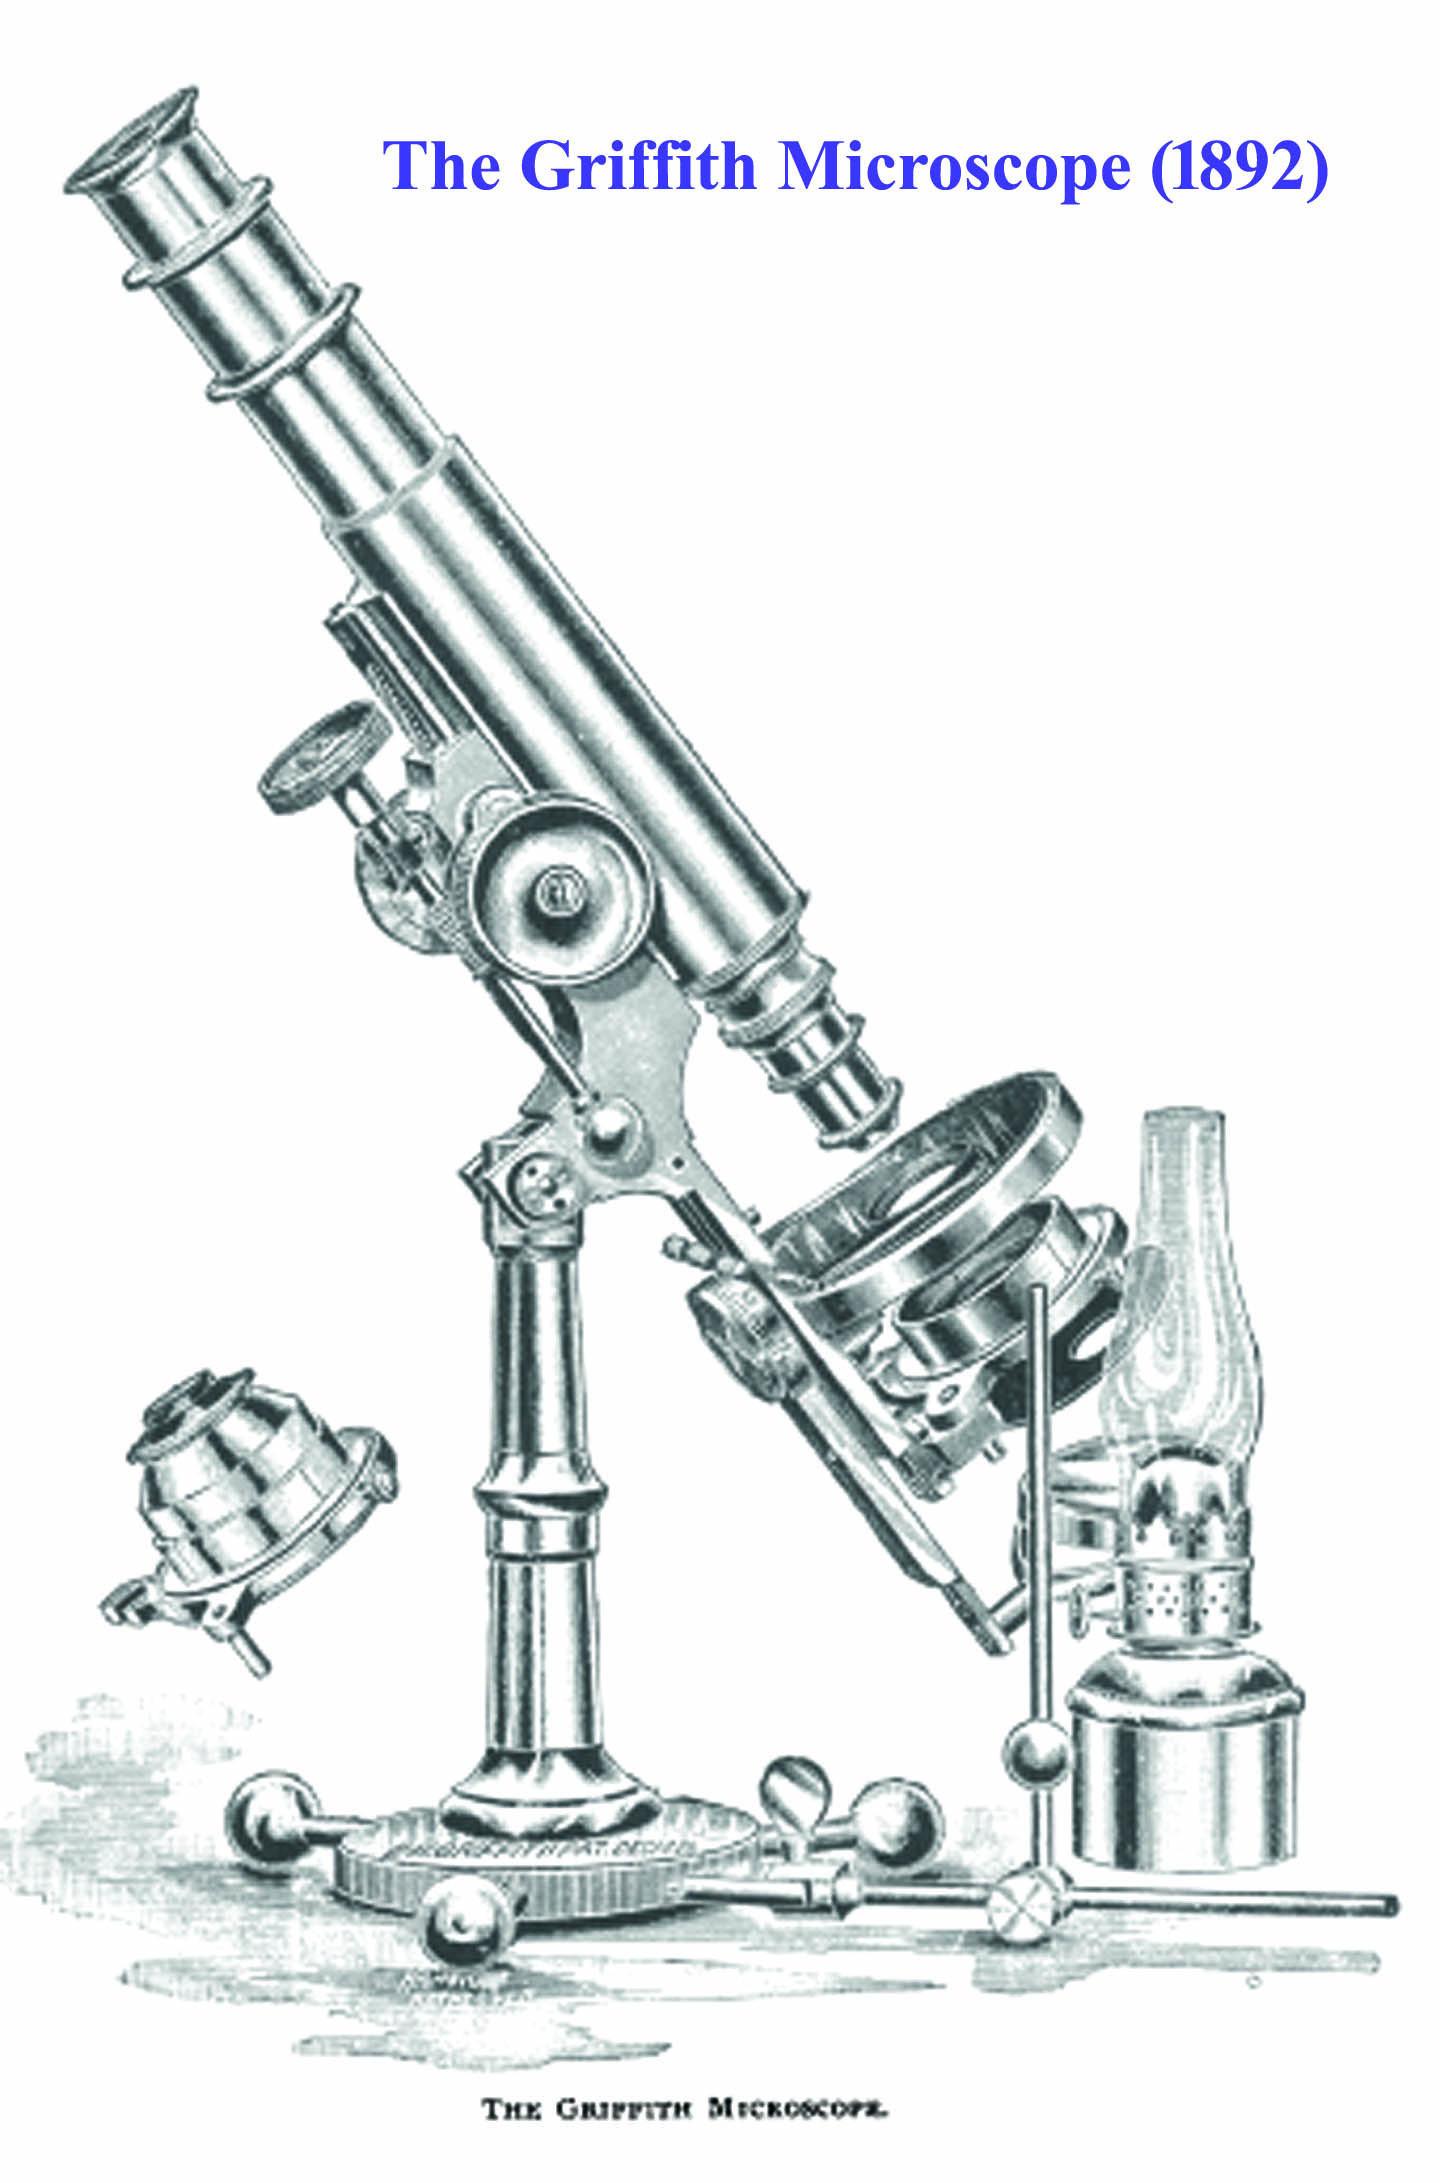 1892 Griffith Microscope